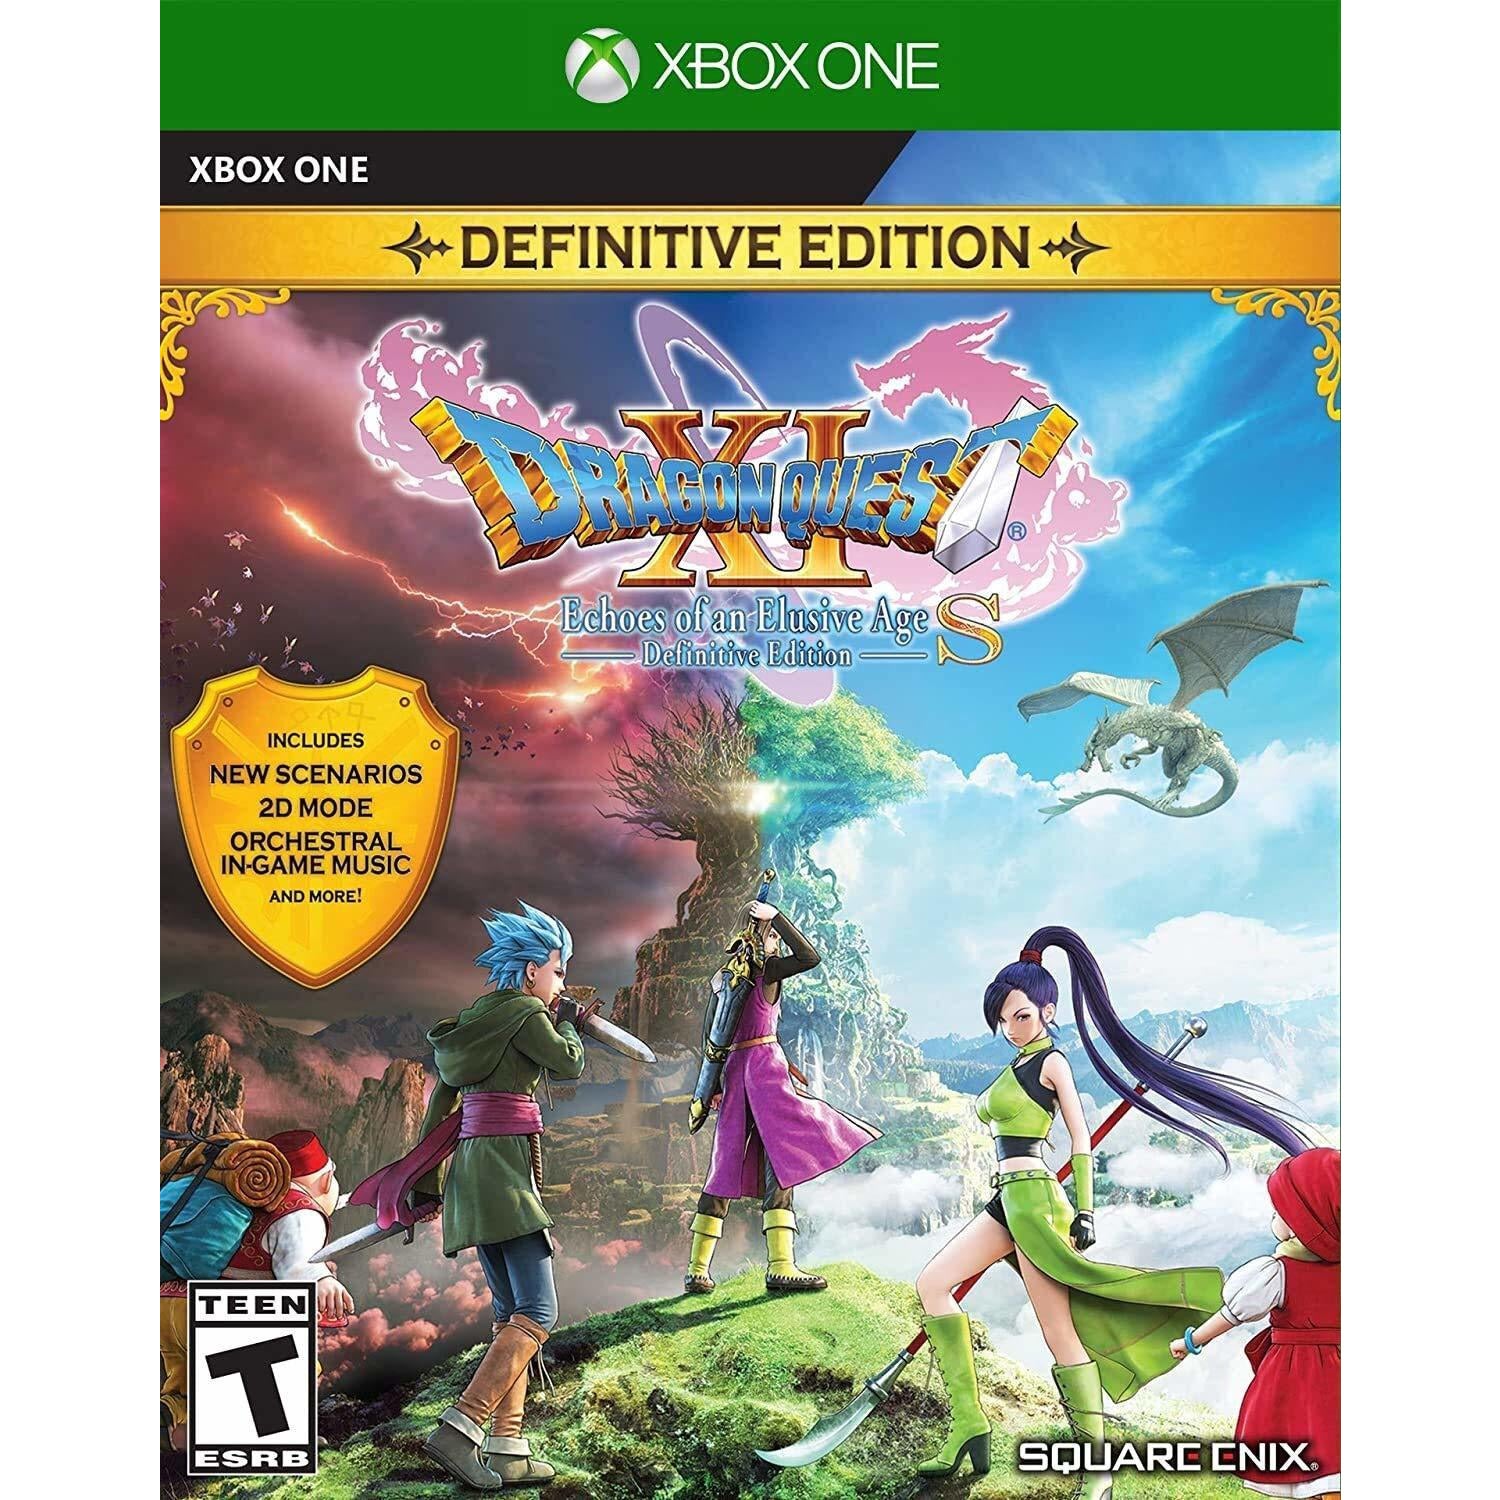 XBOX ONE - Dragon Quest XI Echoes of an elusive age